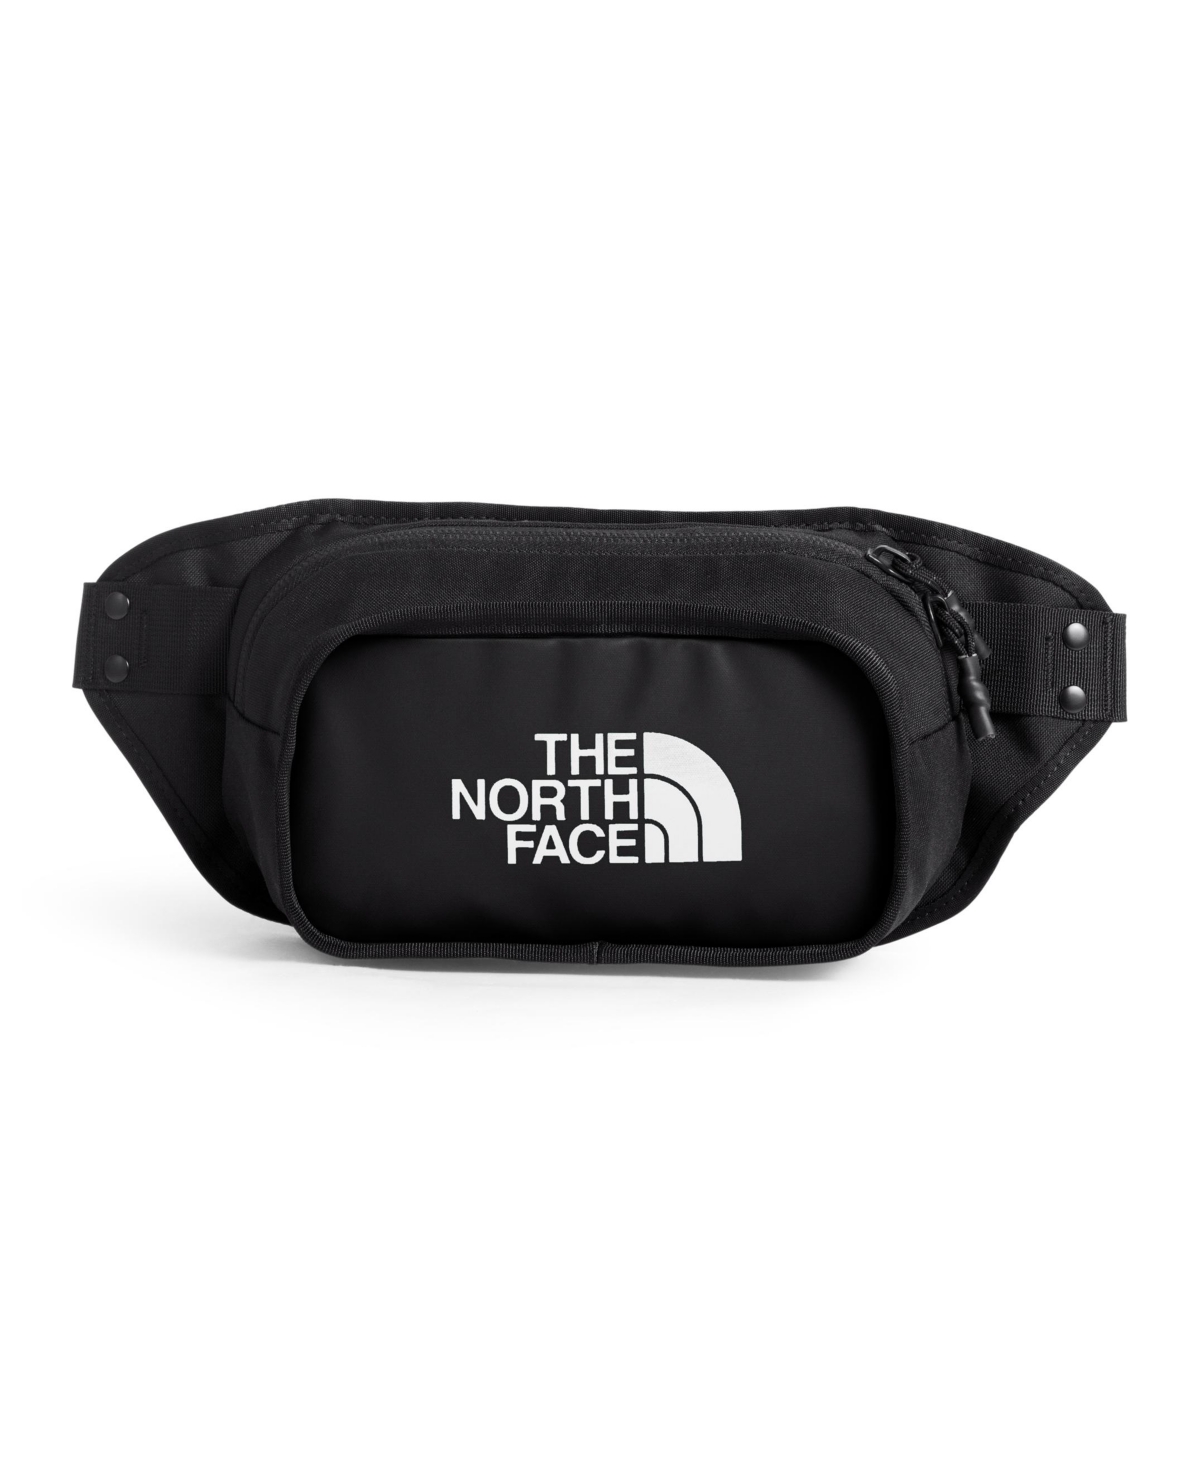 THE NORTH FACE MENS EXPLORE HIP PACK BAG